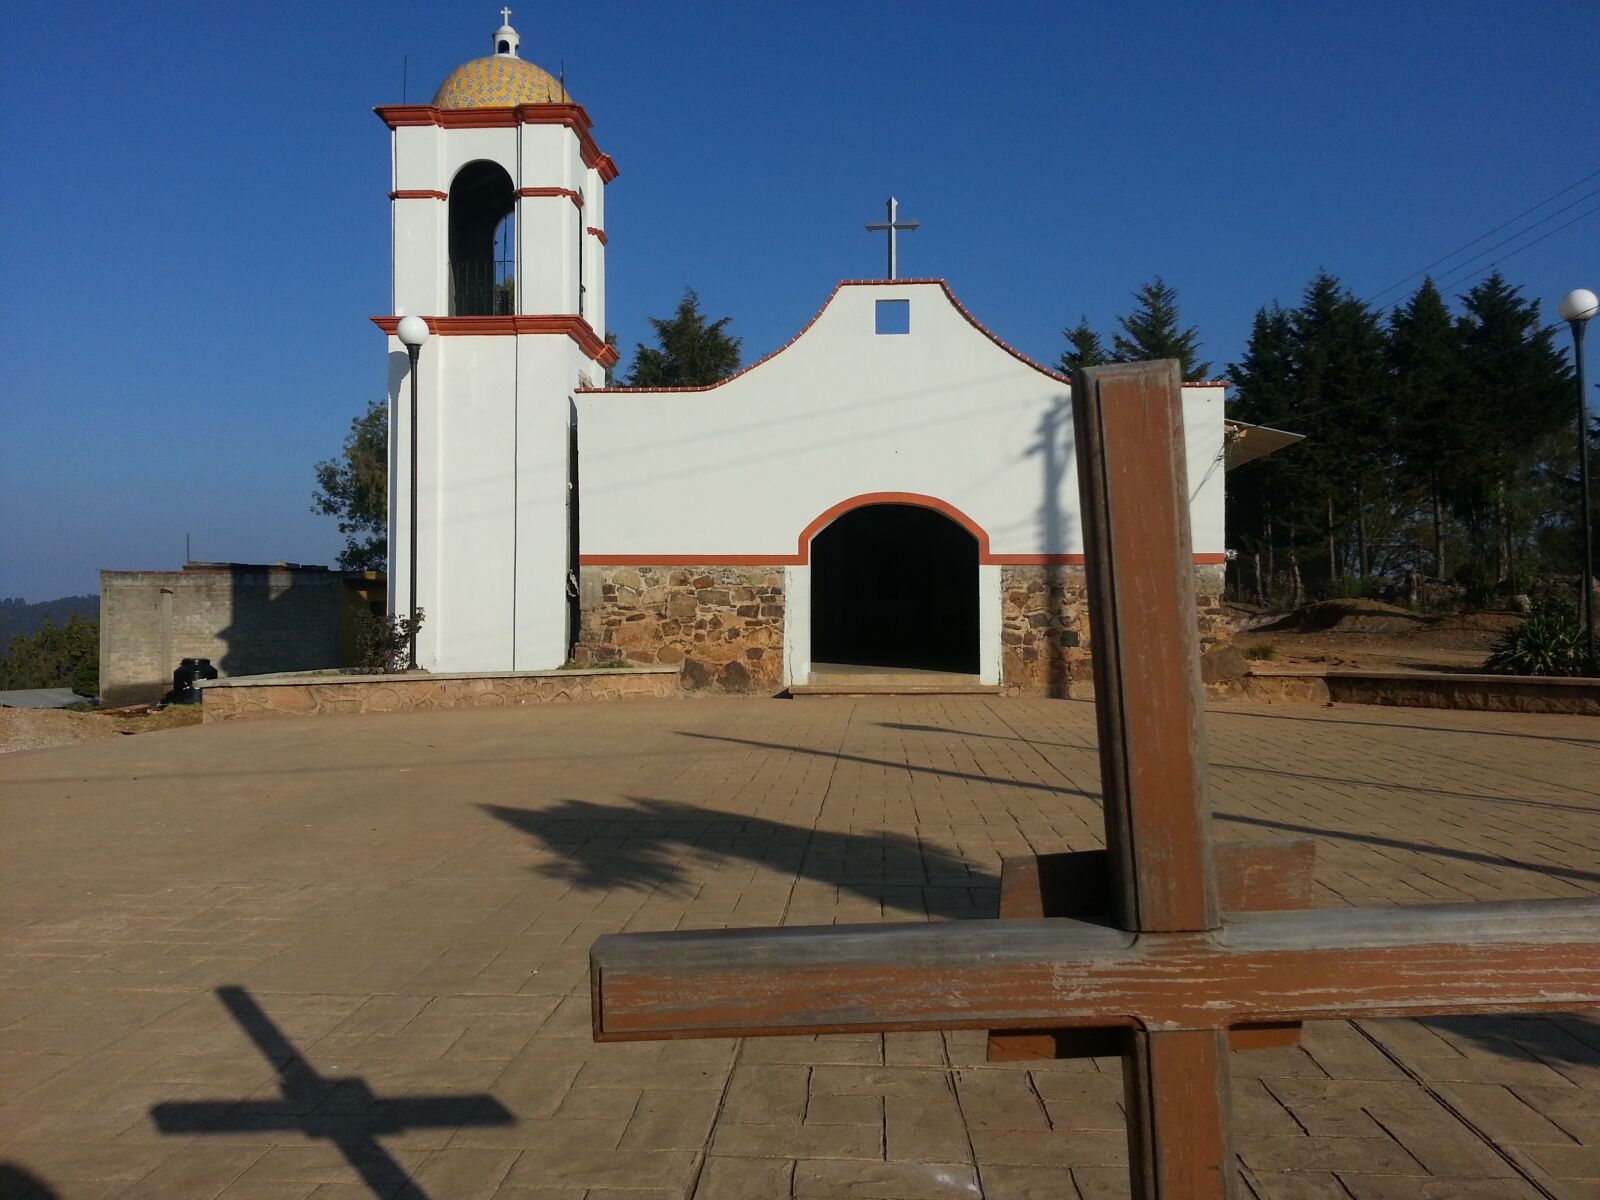 Samsung Galaxy S3 sample photo. Church, architecture, religious photography